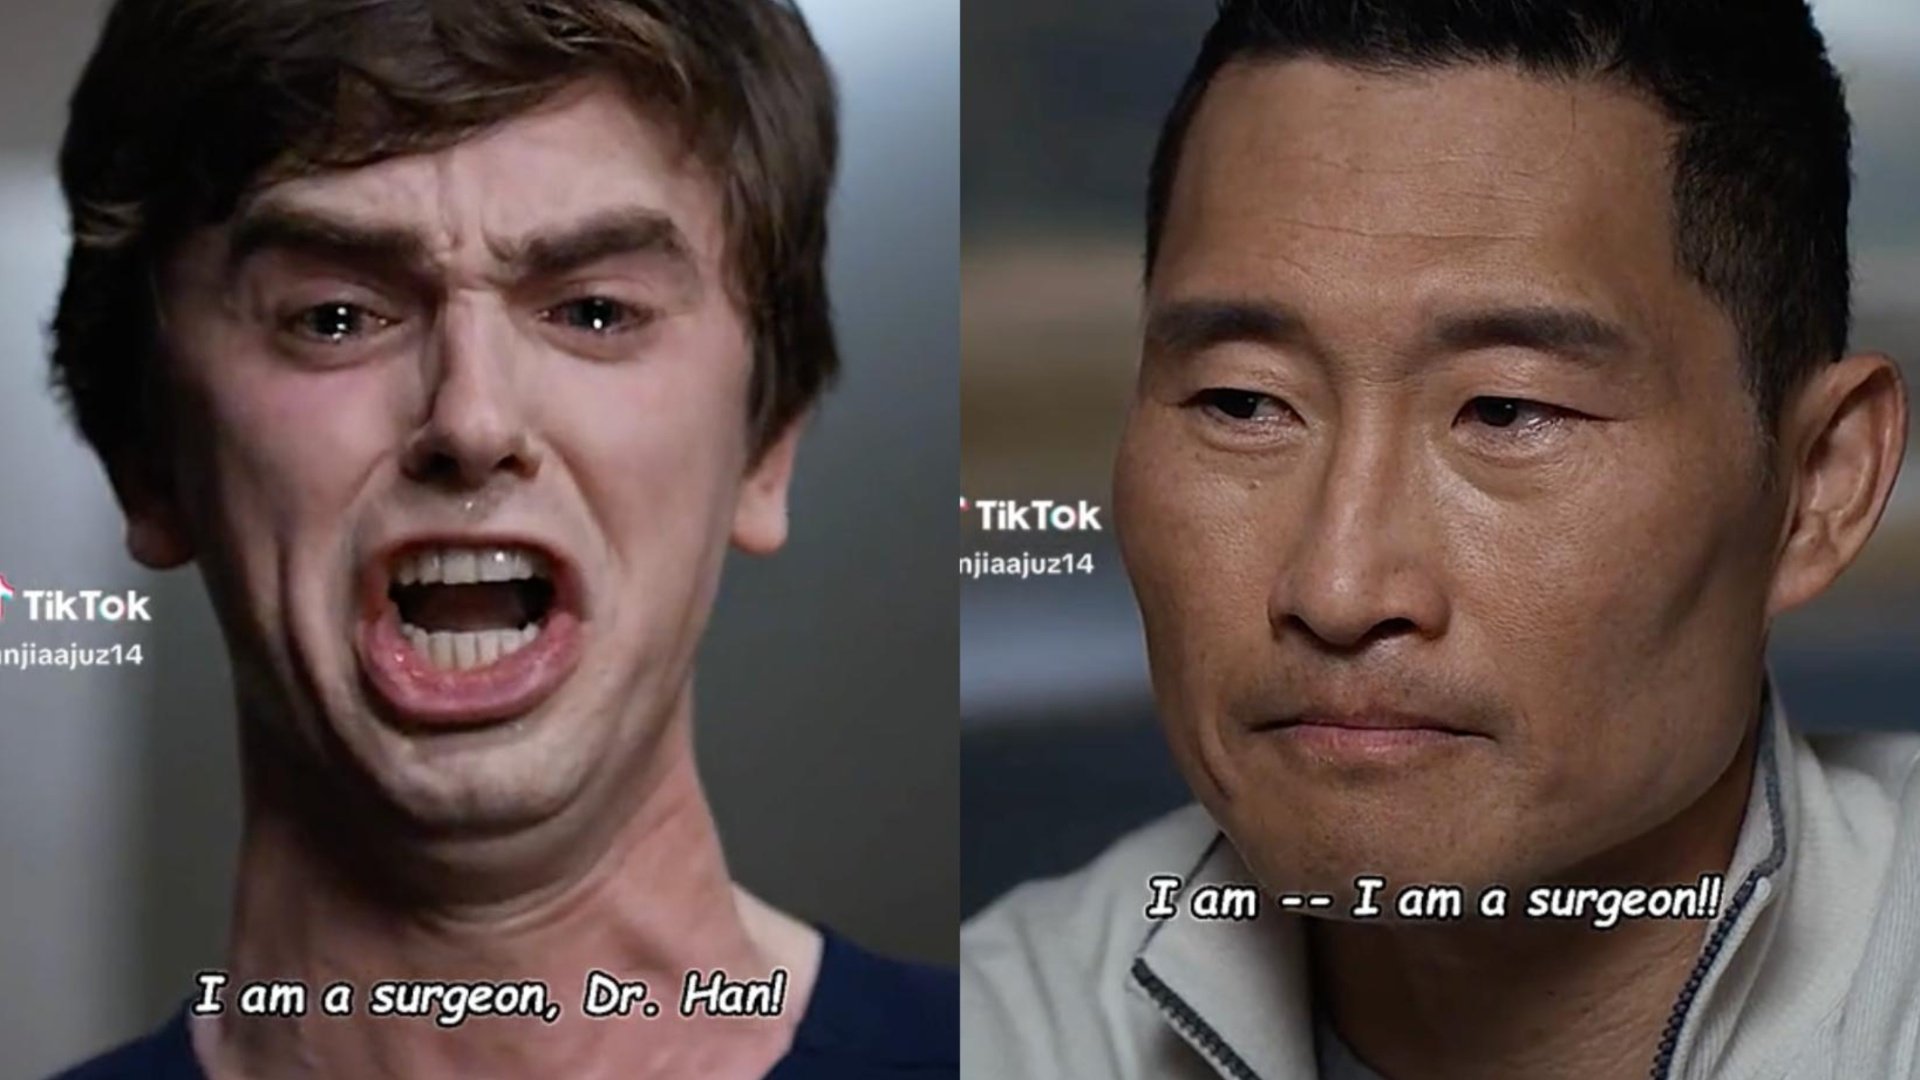 TikTok: What is The Good Doctor 'I am a Surgeon' meme about?